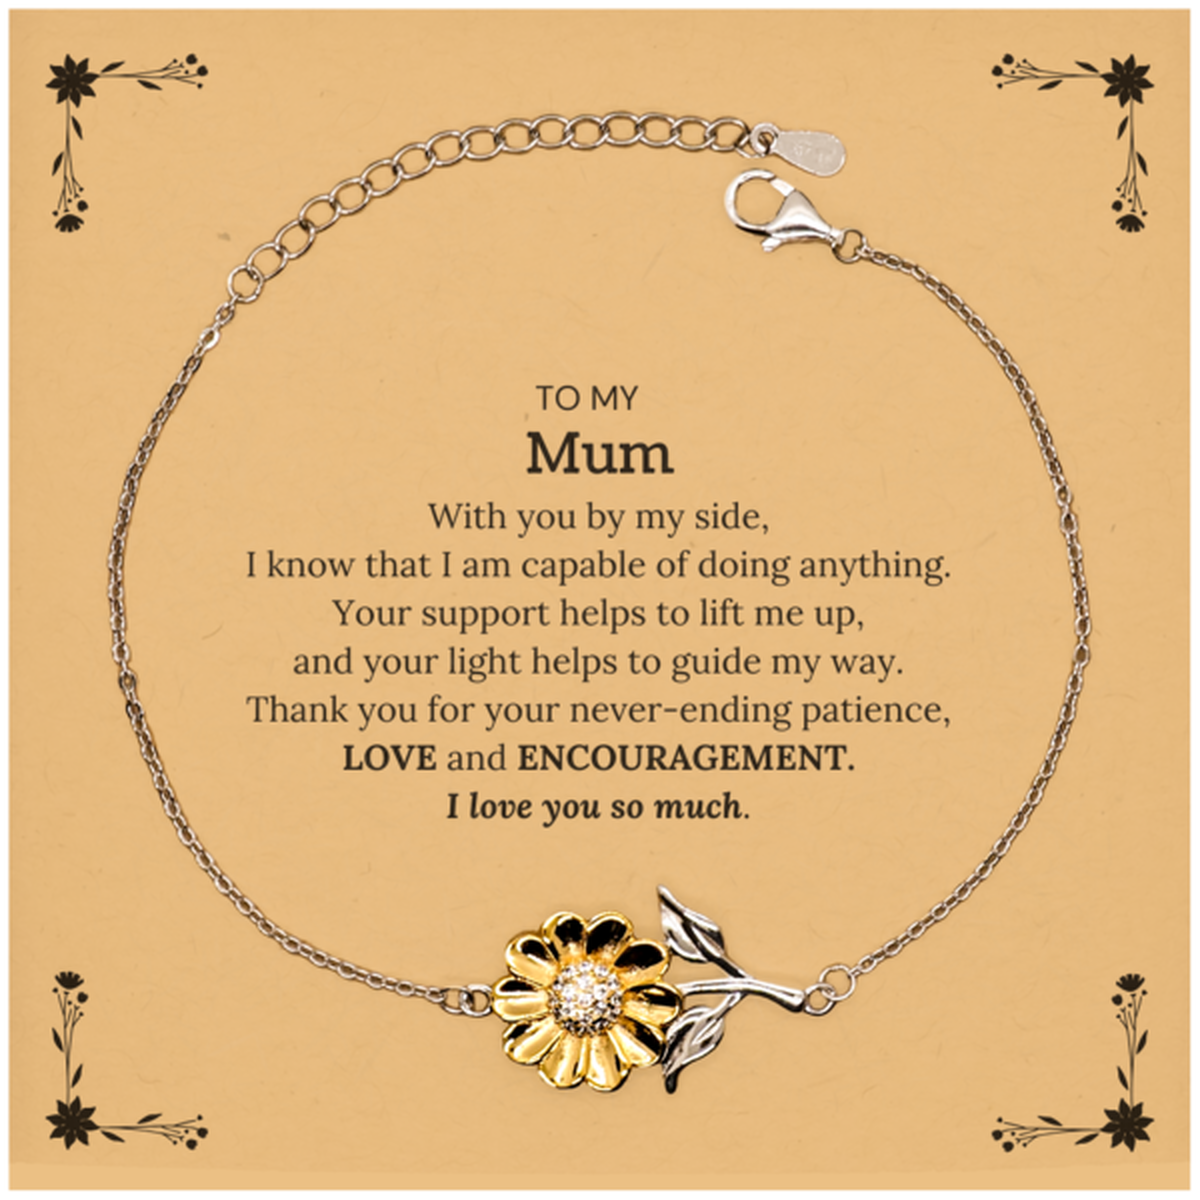 Appreciation Mum Sunflower Bracelet Gifts, To My Mum Birthday Christmas Wedding Keepsake Gifts for Mum With you by my side, I know that I am capable of doing anything. I love you so much